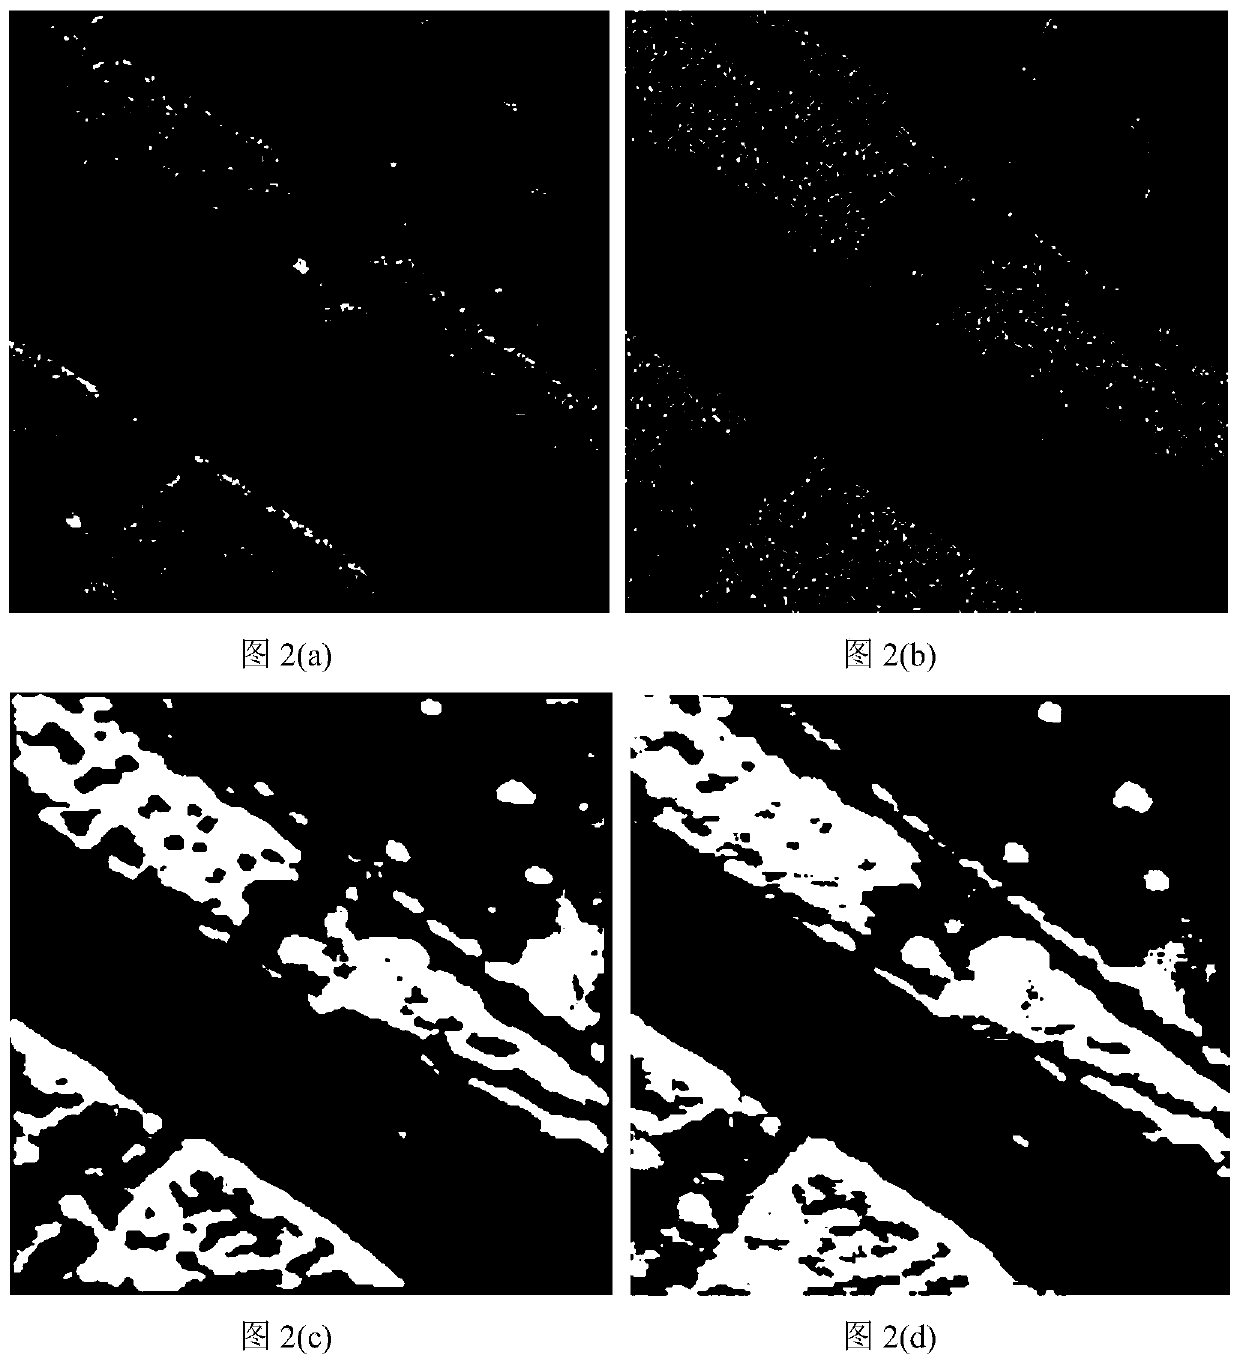 High-resolution sar image classification method based on co-sparse model